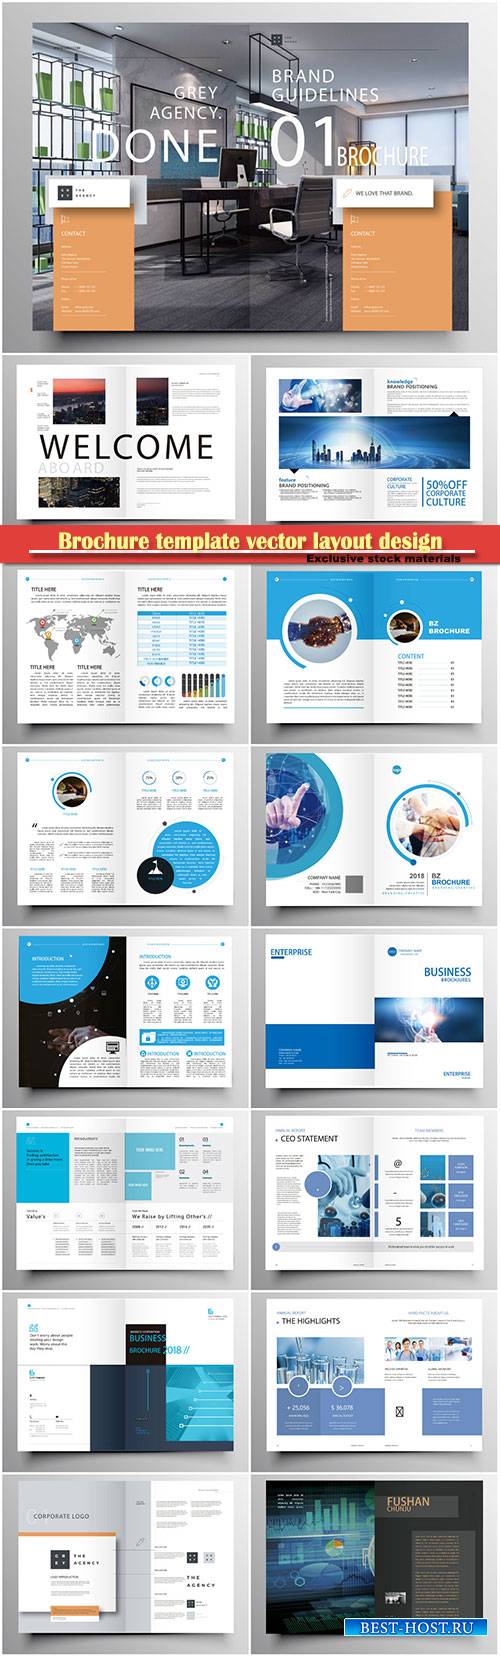 Brochure template vector layout design, corporate business annual report, magazine, flyer mockup # 131